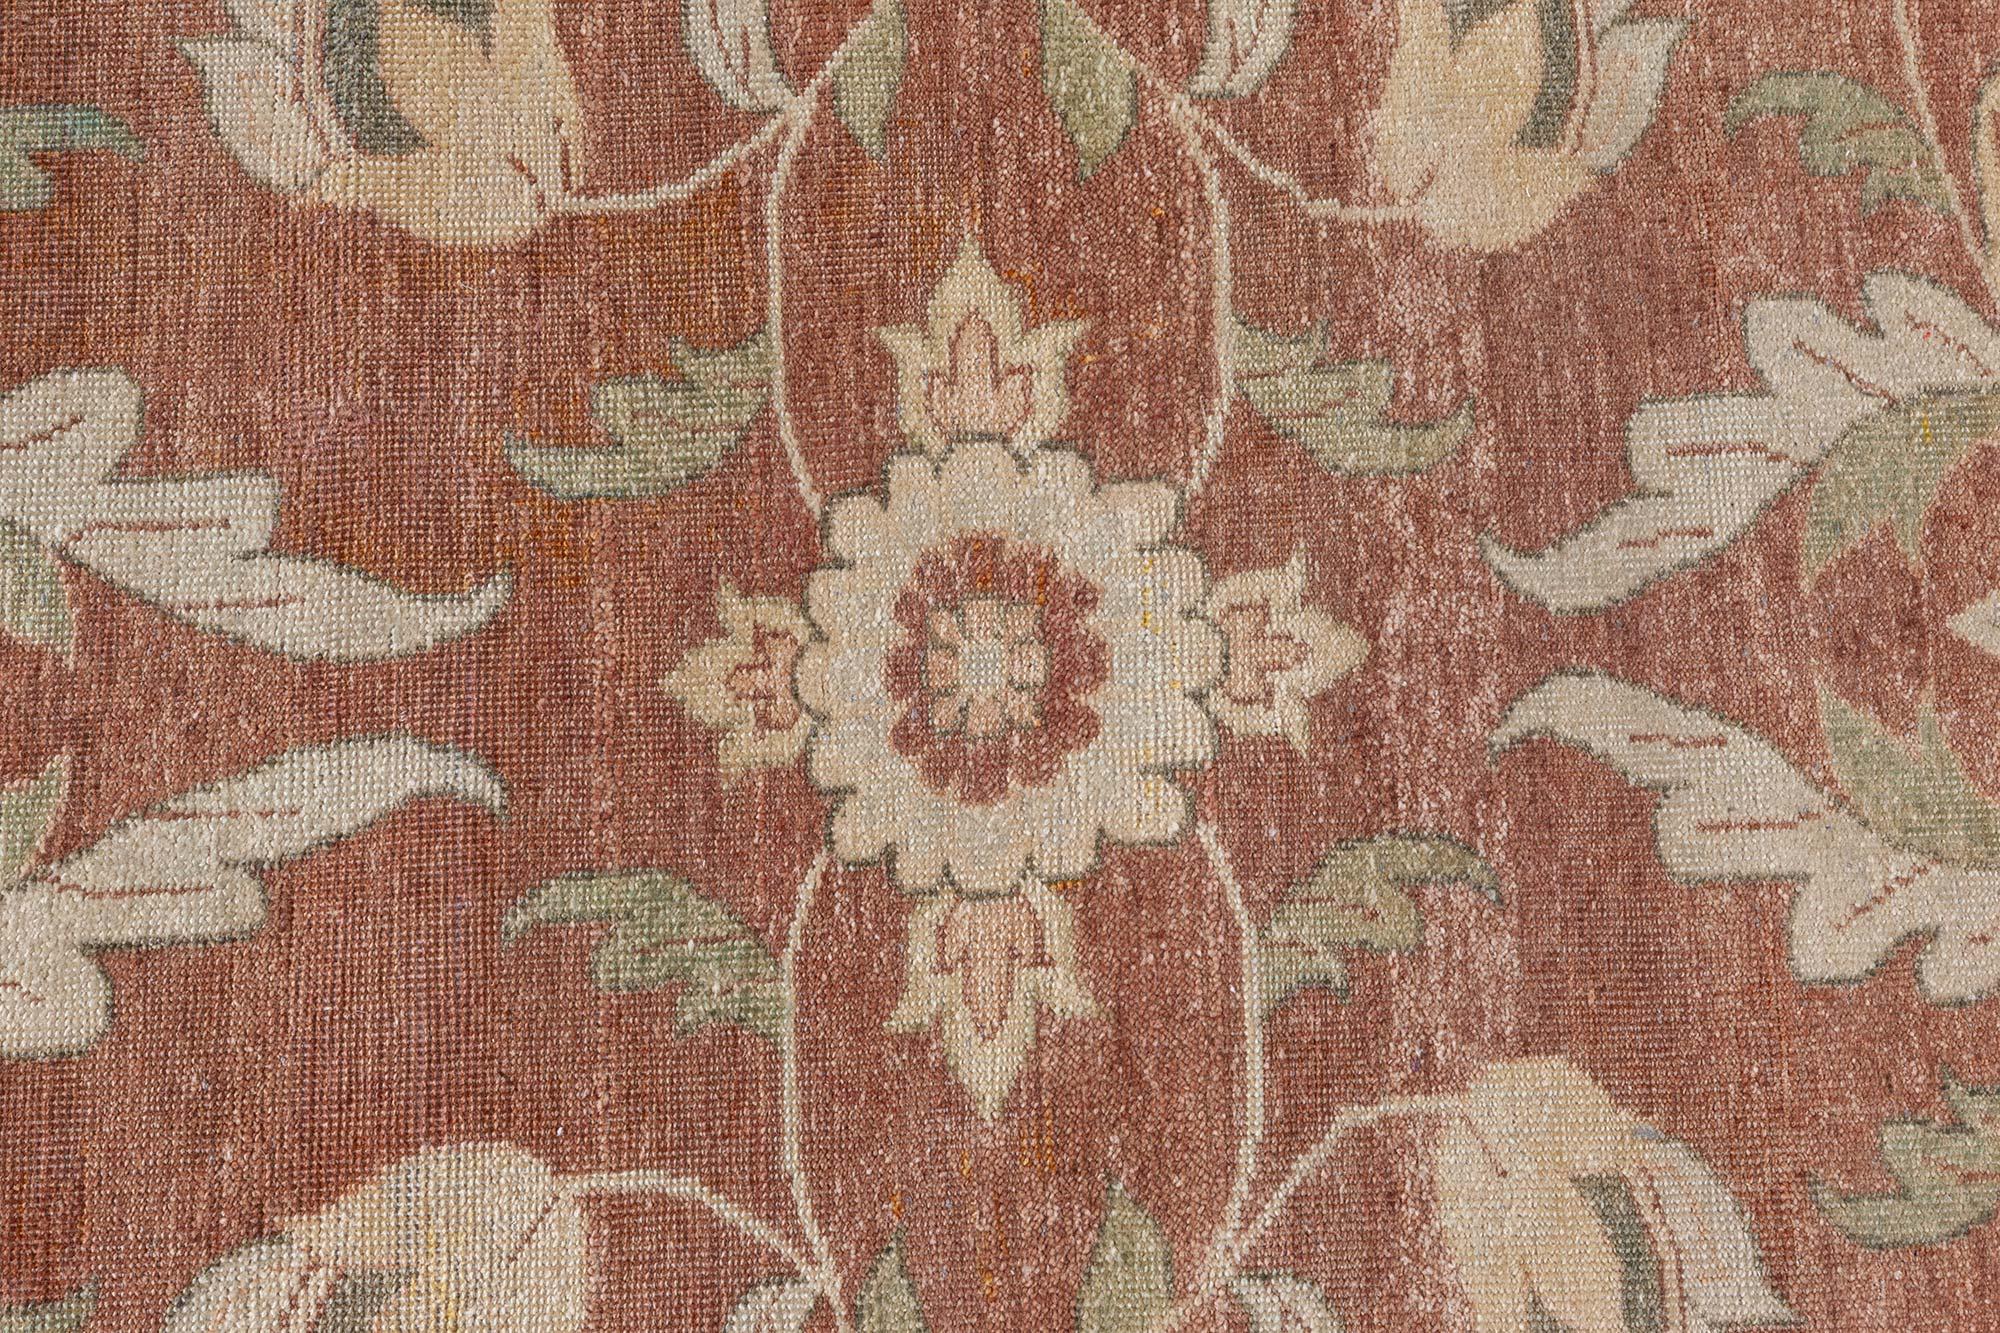 Modern Traditional Inspired Hand-knotted Wool Rug
Size: 8'0